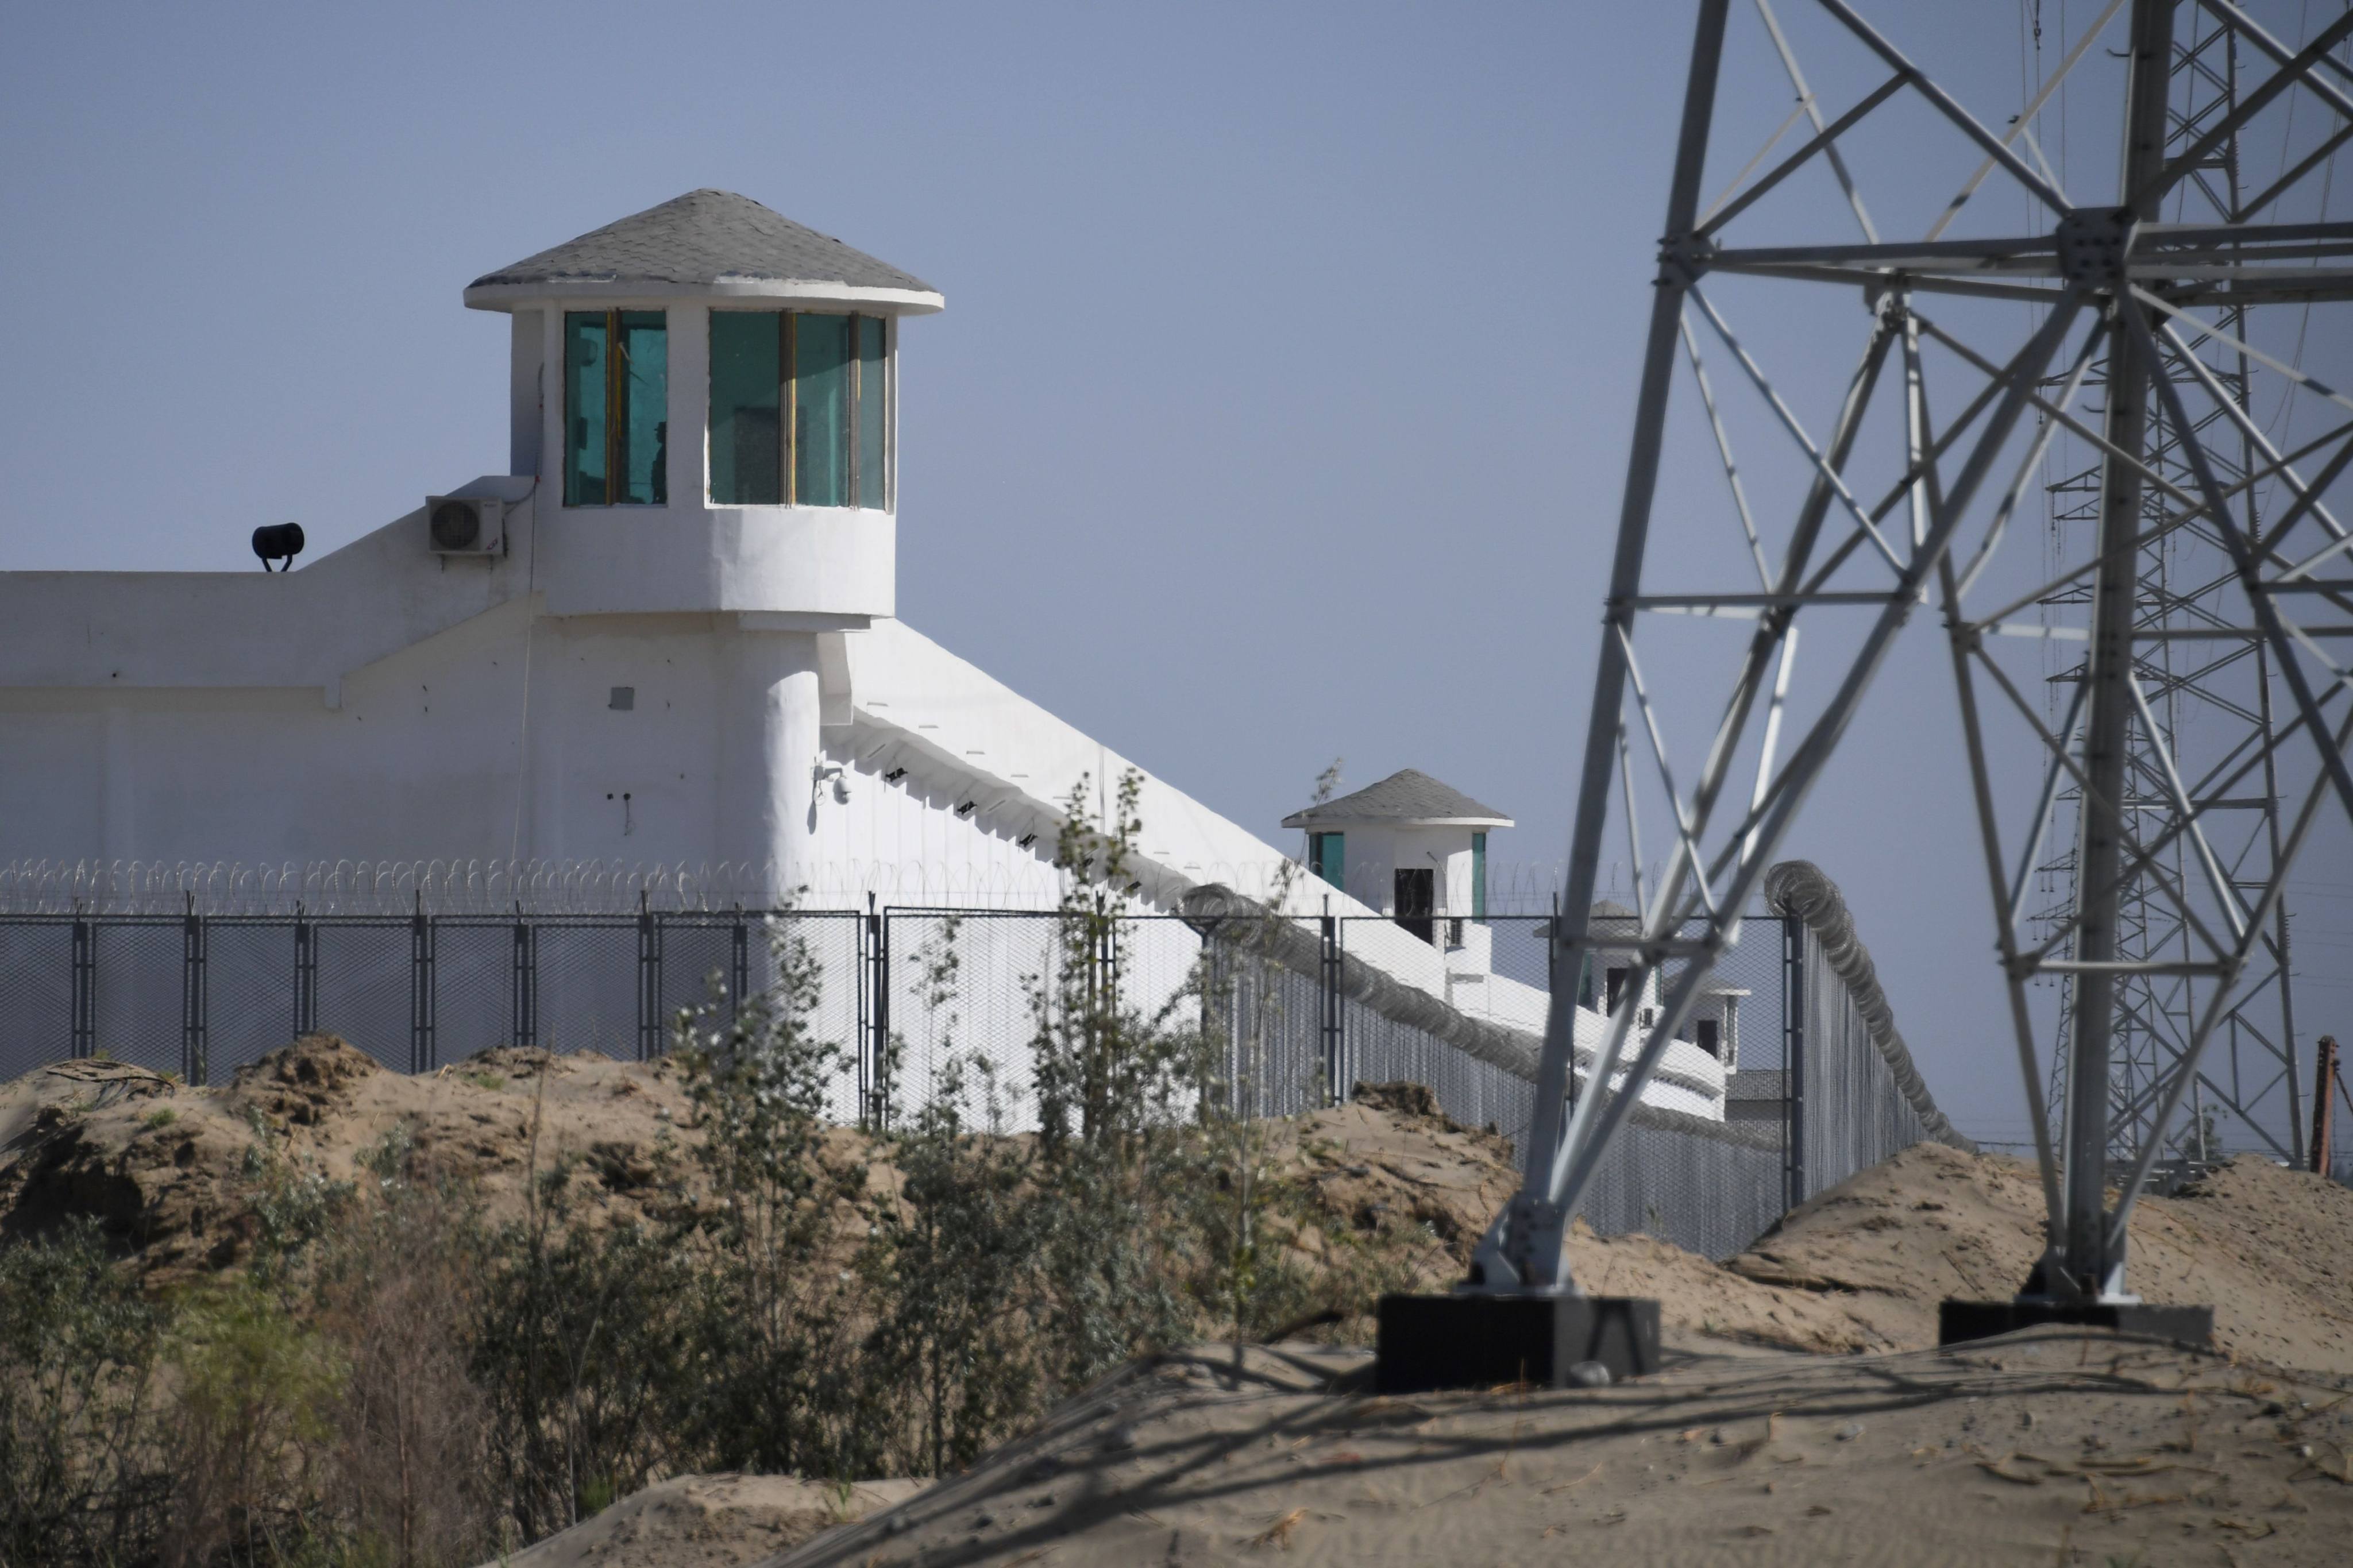 Chen was sanctioned over alleged human rights abuses in Xinjiang, where he is accused of setting up a vast network of internment camps (one cam pictured). File photo: AFP